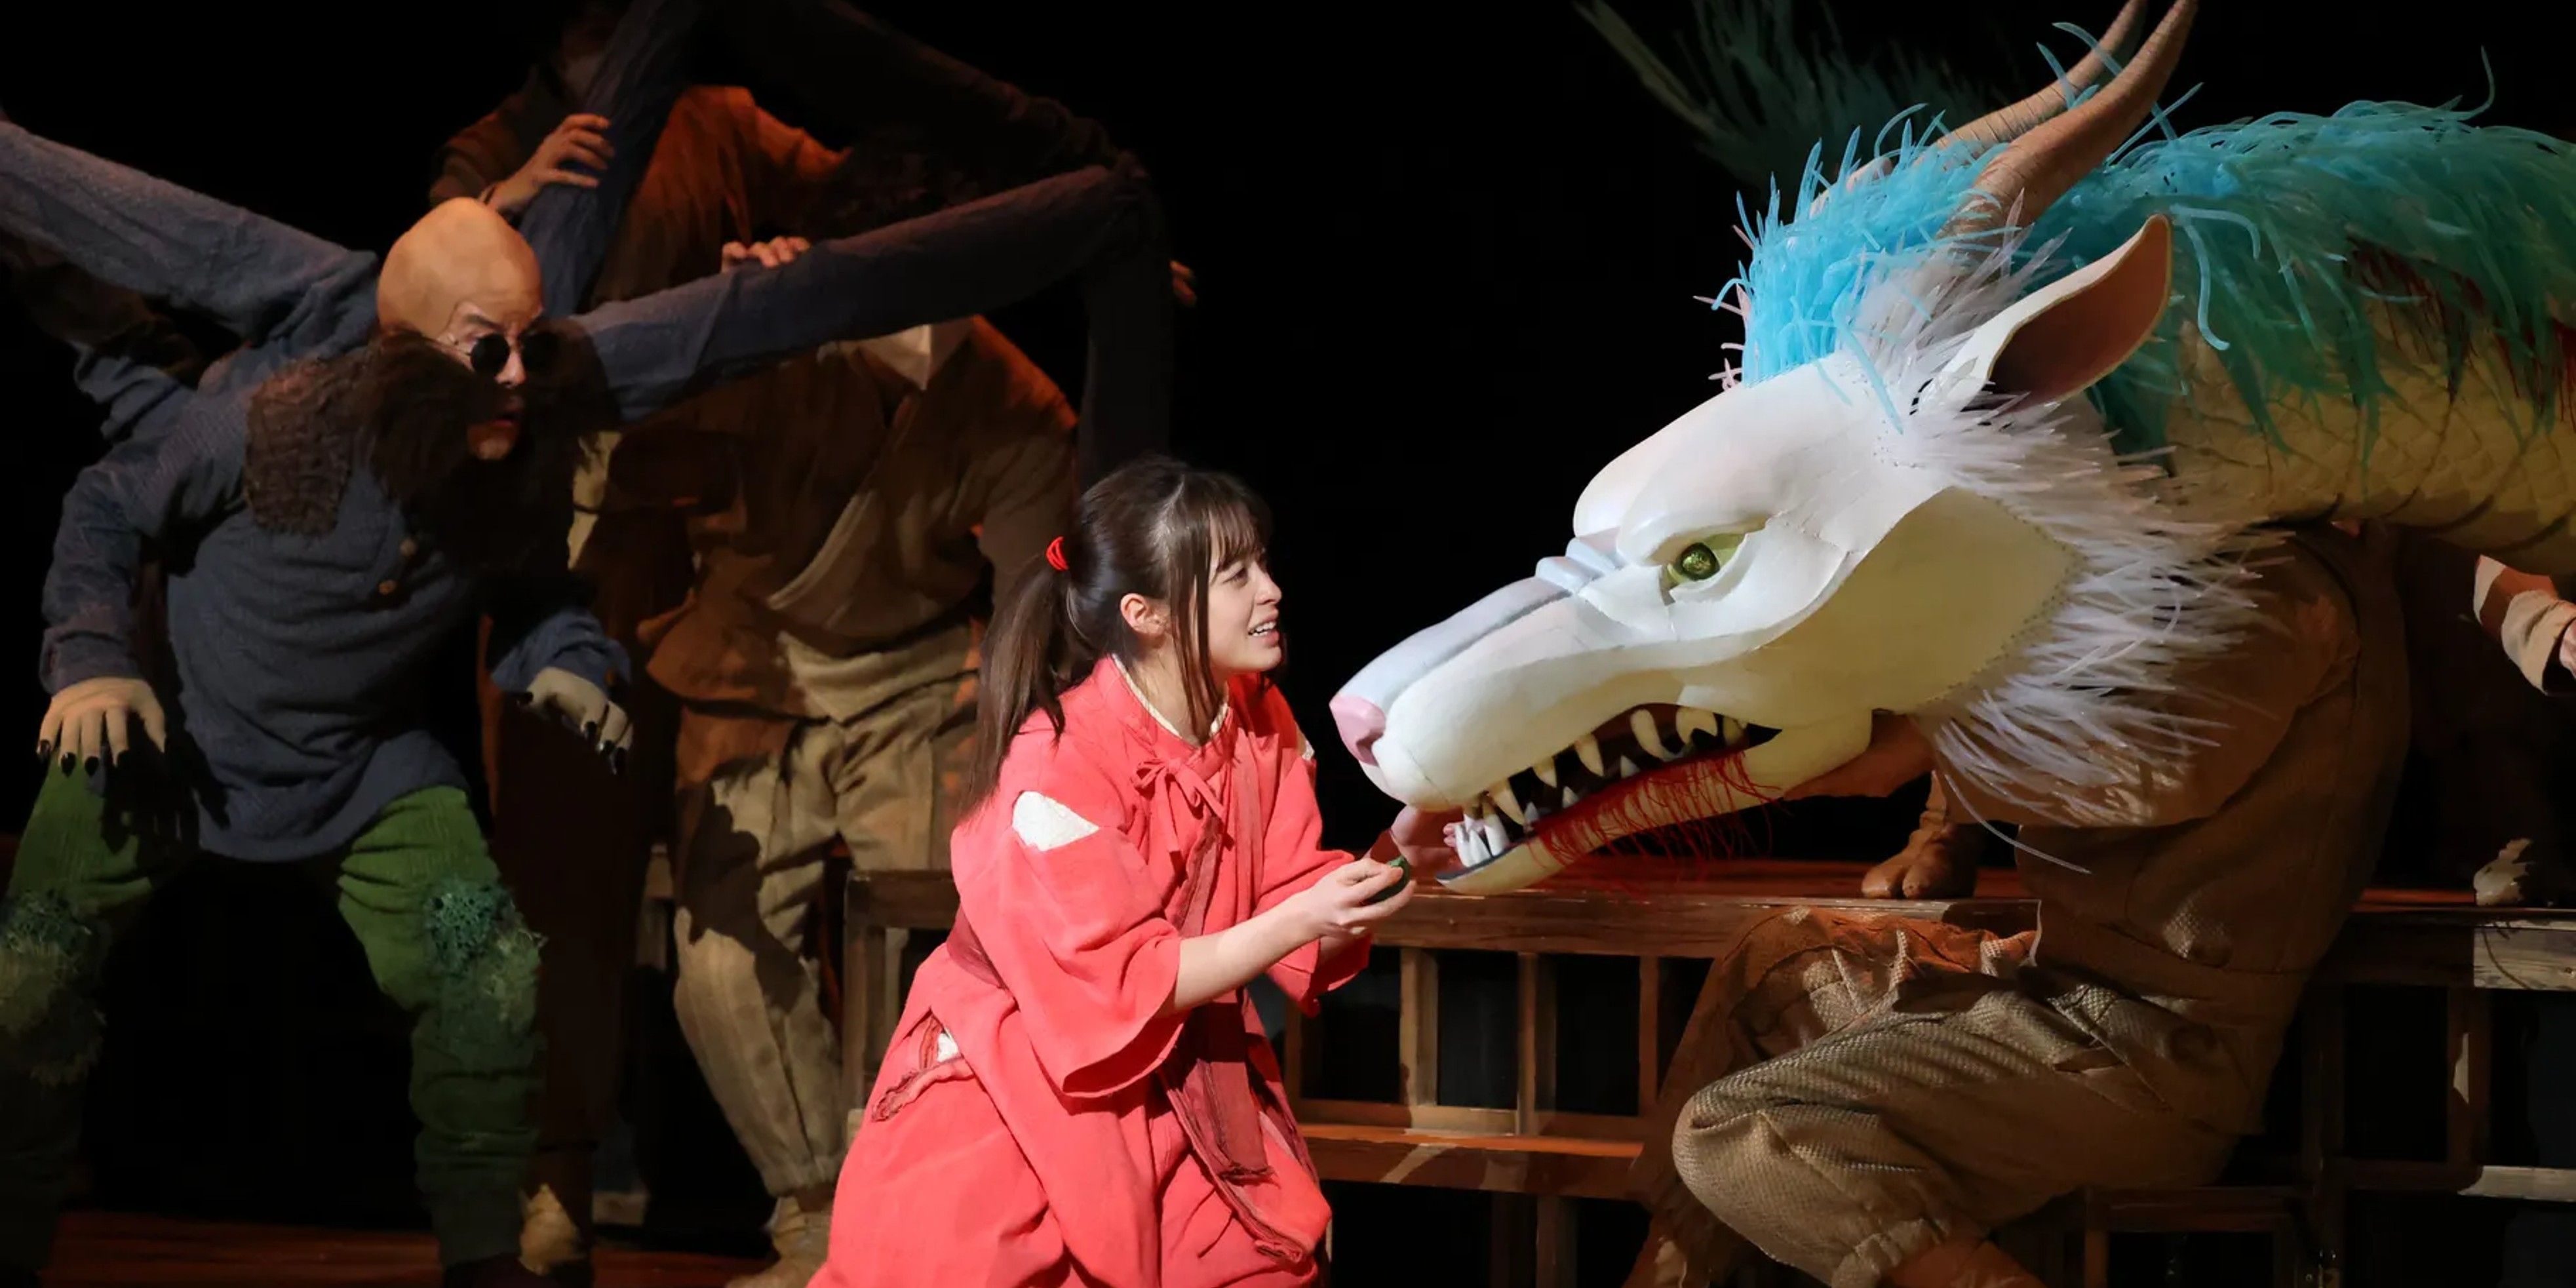 Spirited Away Live on Stage_Chihiro's actress interacts with a puppet version of Haku's dragon form-1